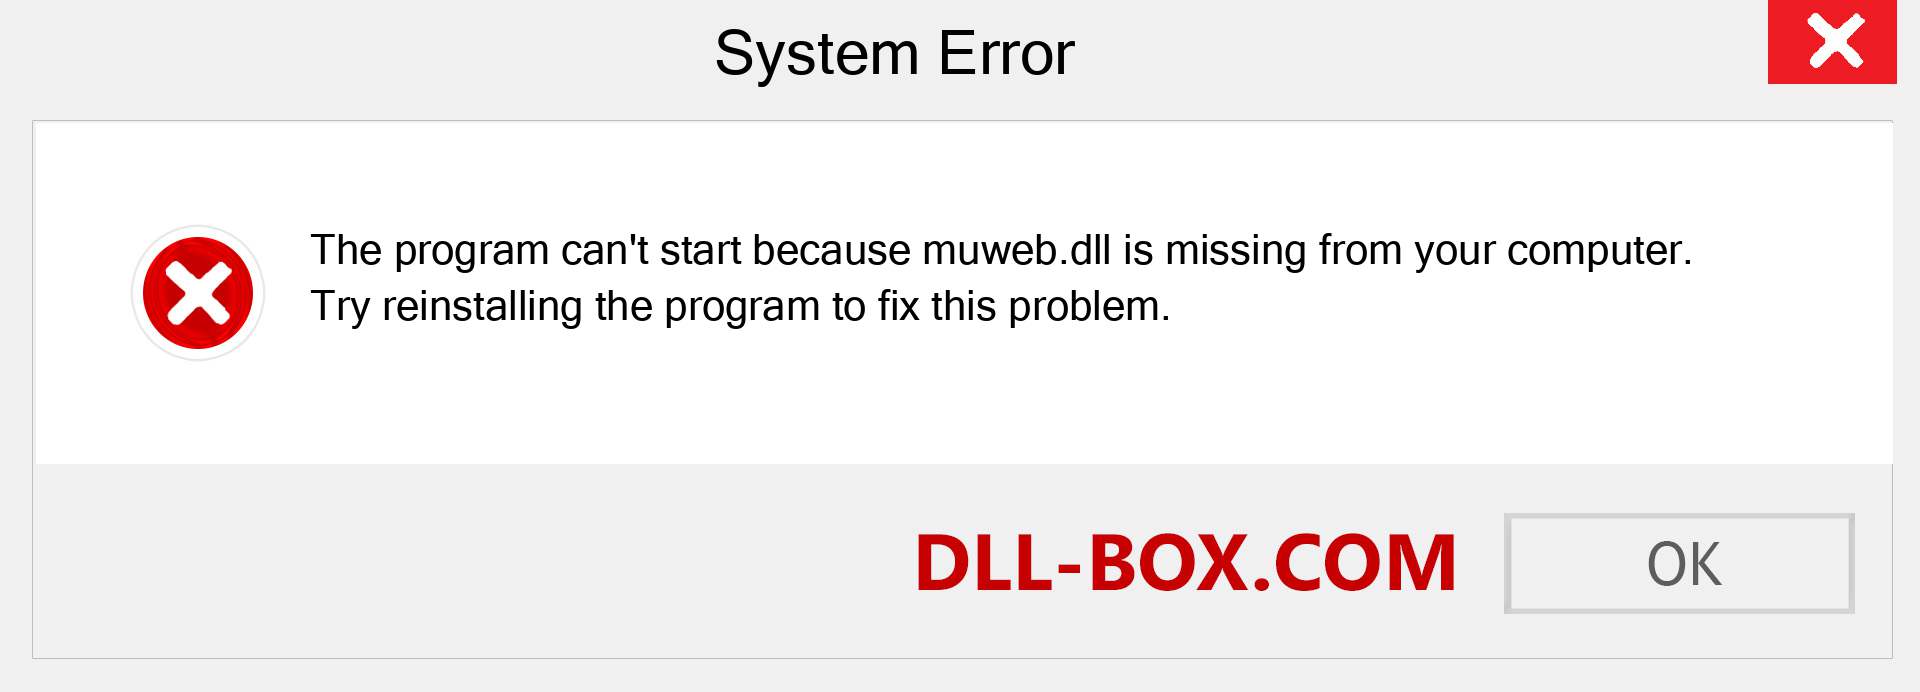  muweb.dll file is missing?. Download for Windows 7, 8, 10 - Fix  muweb dll Missing Error on Windows, photos, images